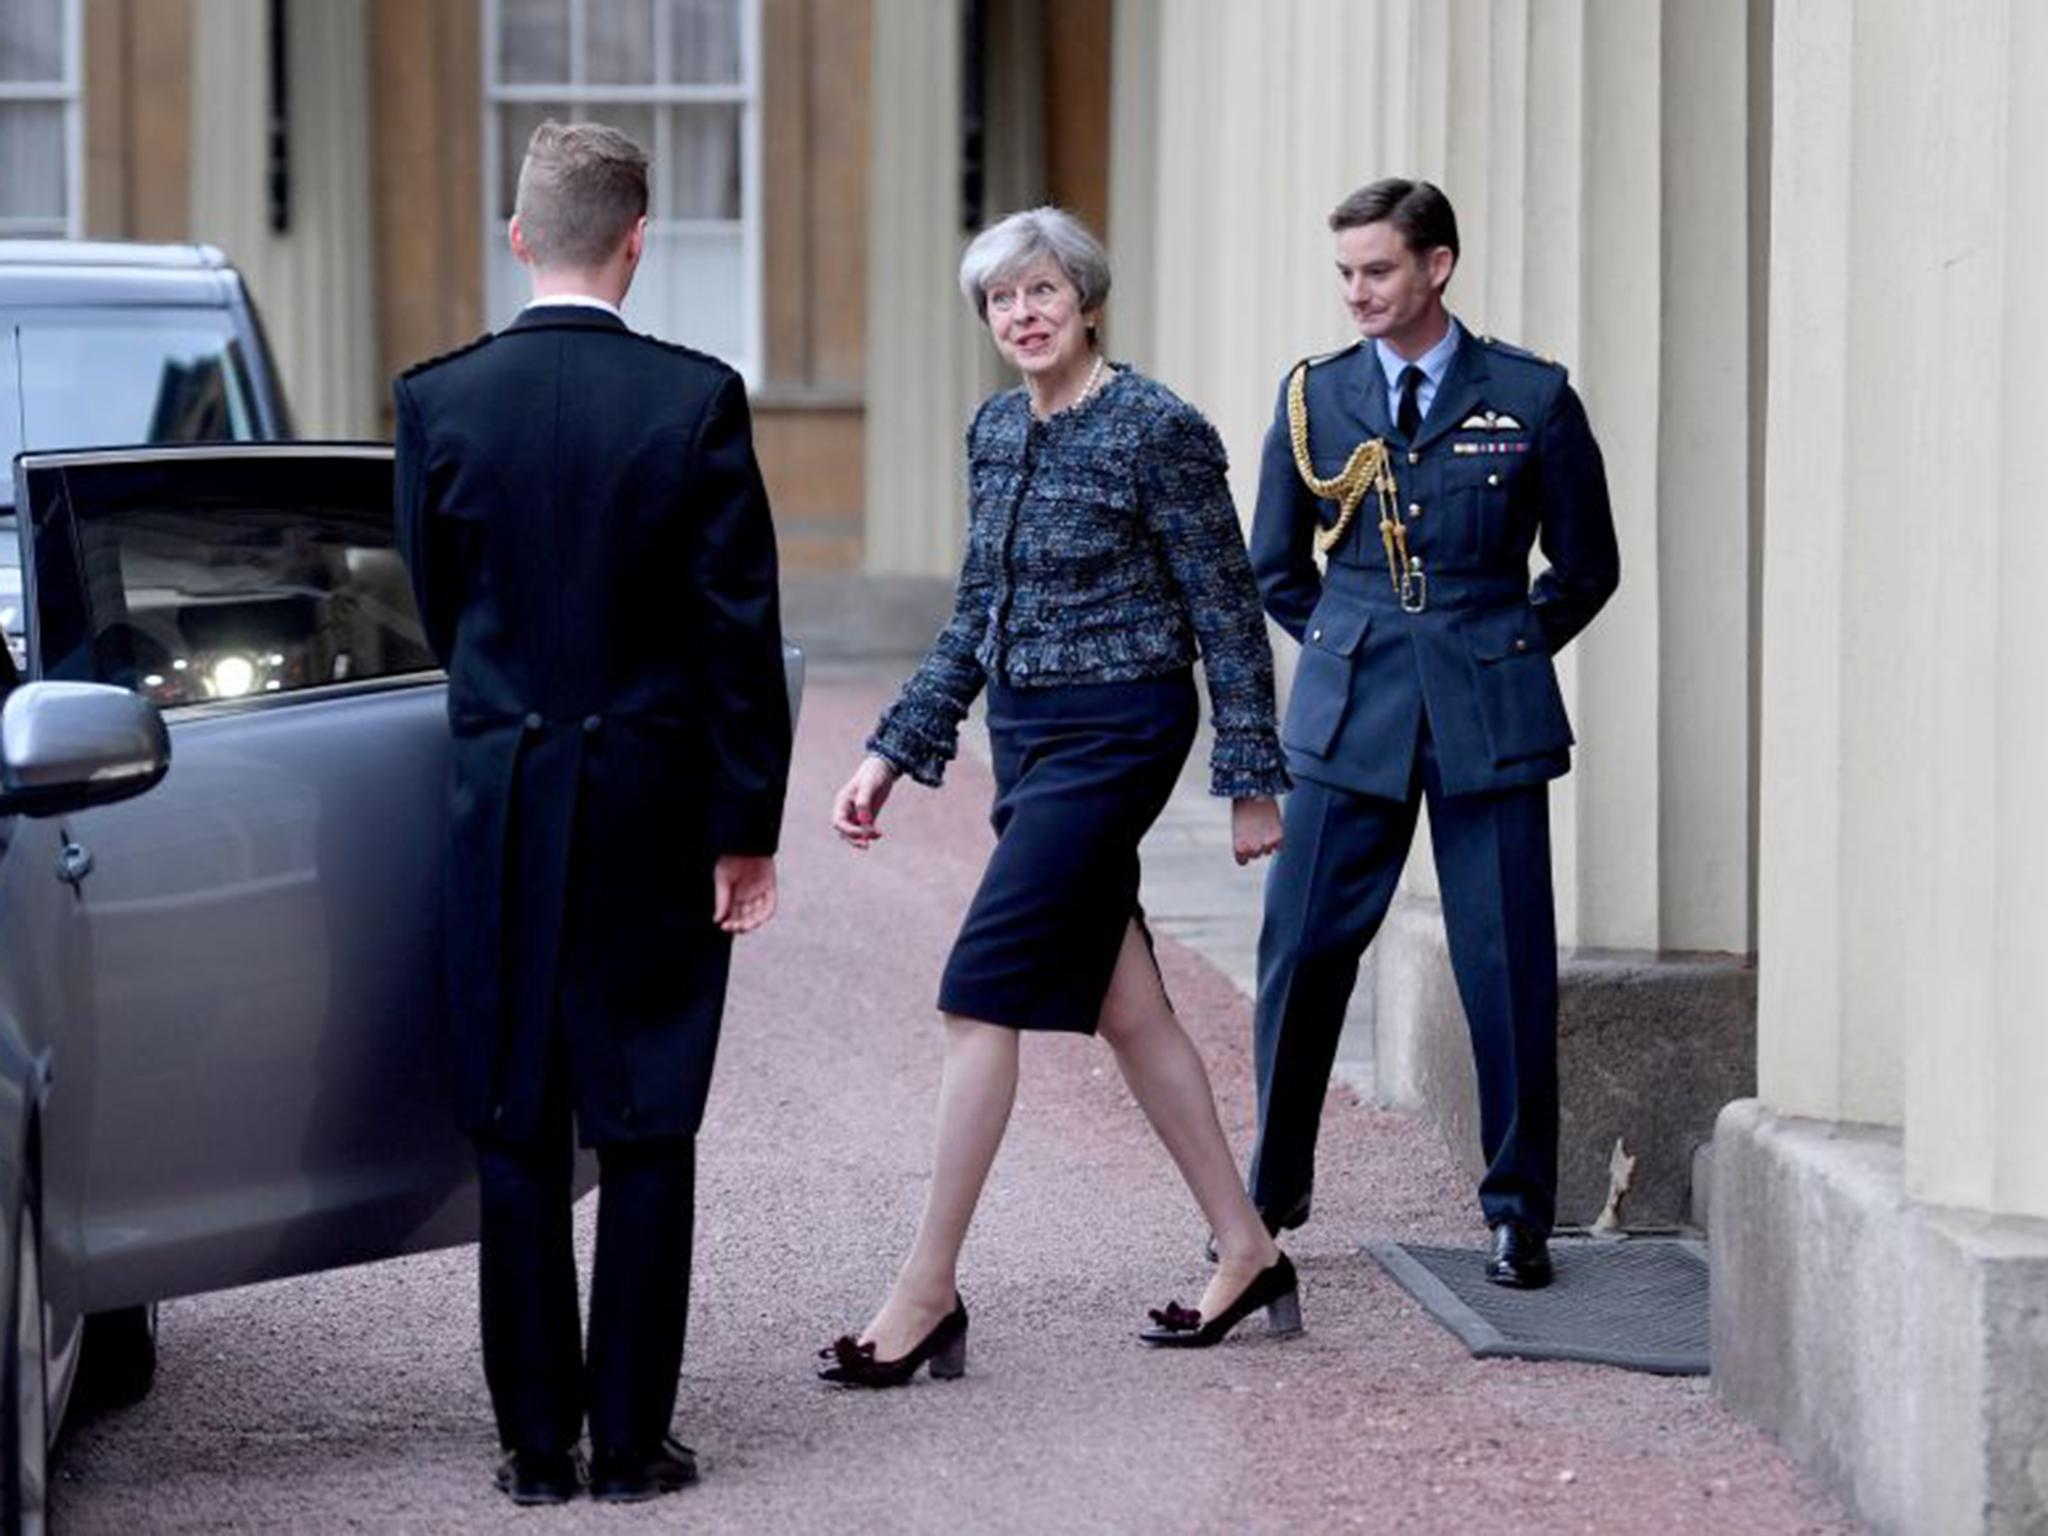 Theresa May leaves Buckingham Palace after meeting Queen Elizabeth after Parliament was dissolved ahead of the general election